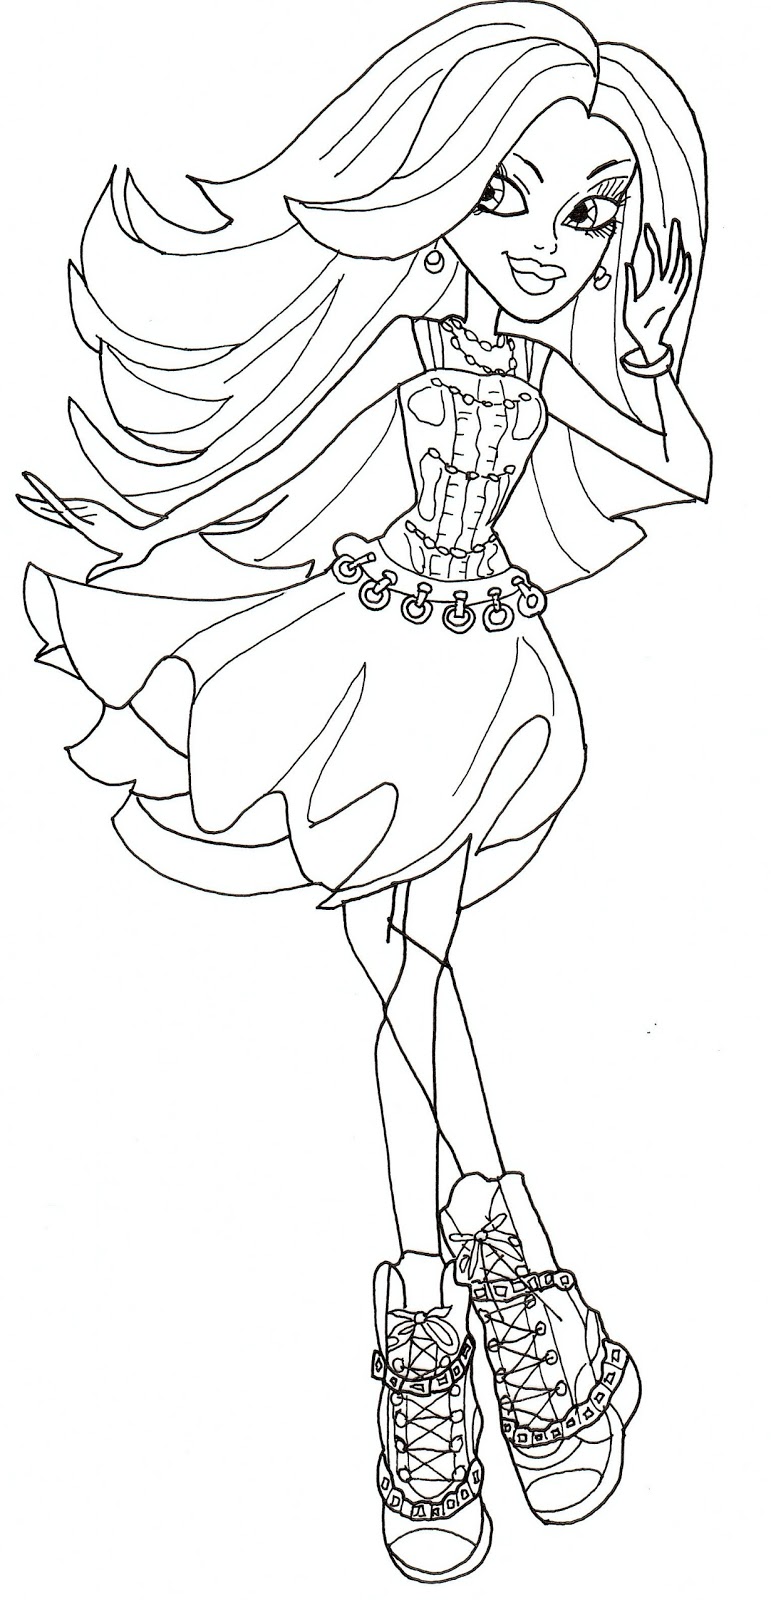 Download Free Printable Monster High Coloring Pages: Spectra Coloring Page